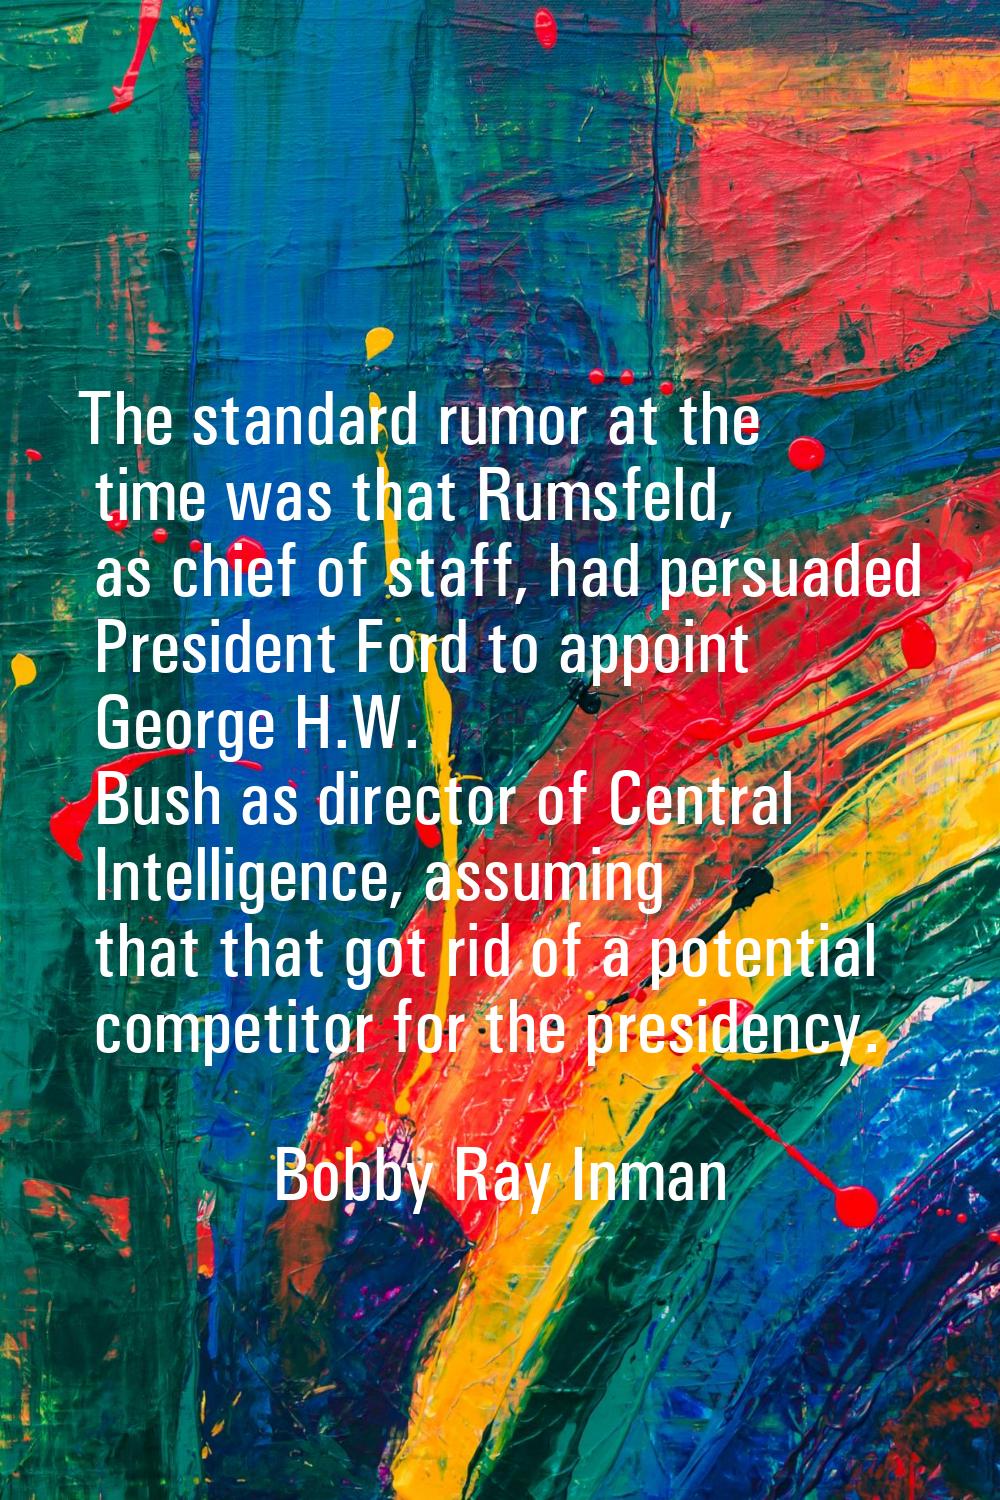 The standard rumor at the time was that Rumsfeld, as chief of staff, had persuaded President Ford t